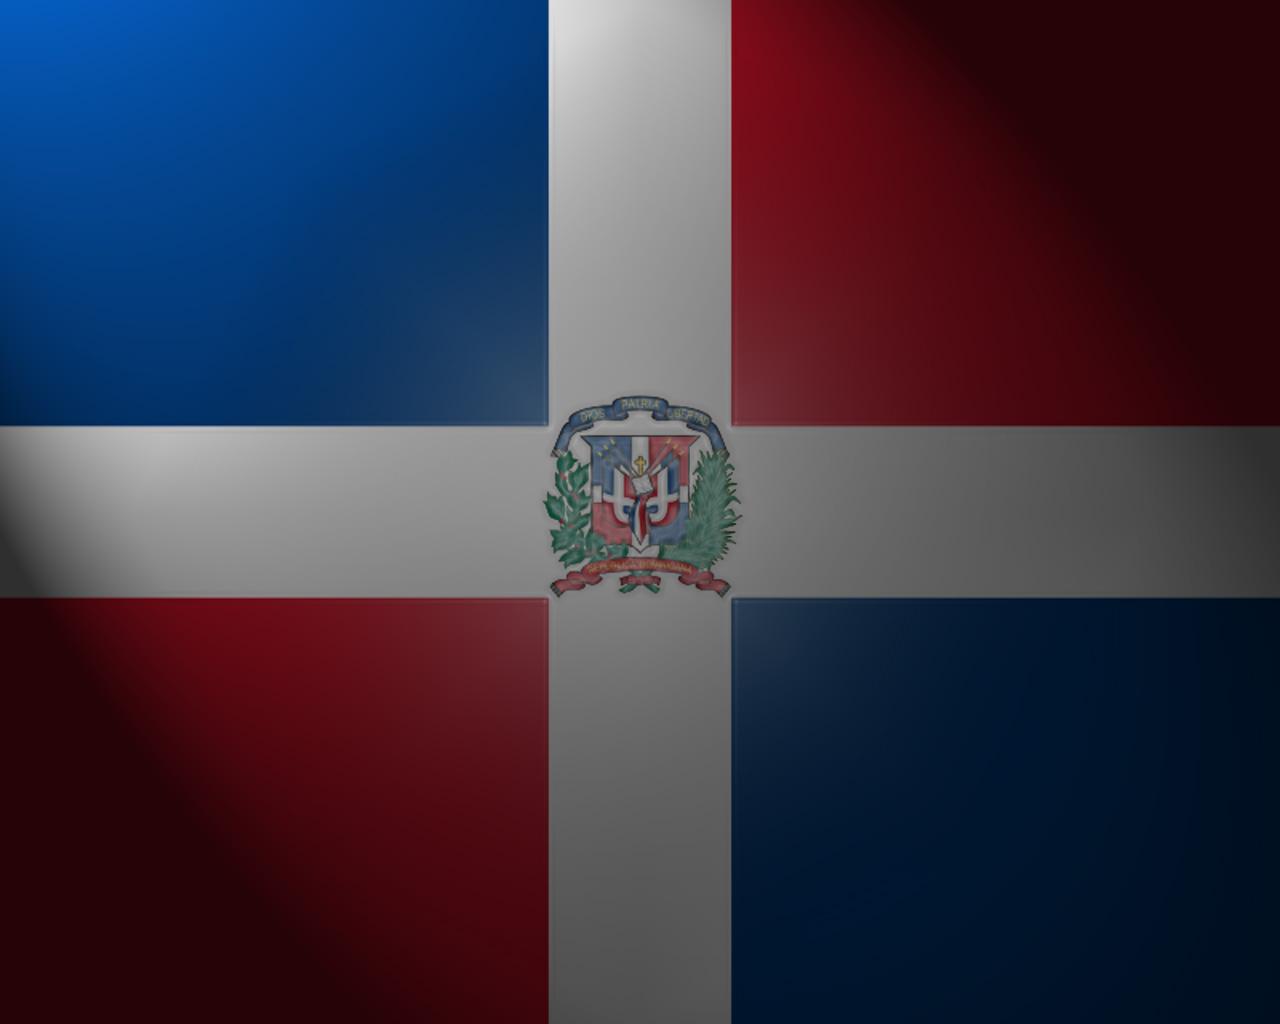 Download wallpapers 4k Flag of Dominican Republic grunge flags North  American countries national symbols brush stroke Dominican Republic  flag grunge art North America Dominican Republic for desktop with  resolution 3840x2400 High Quality